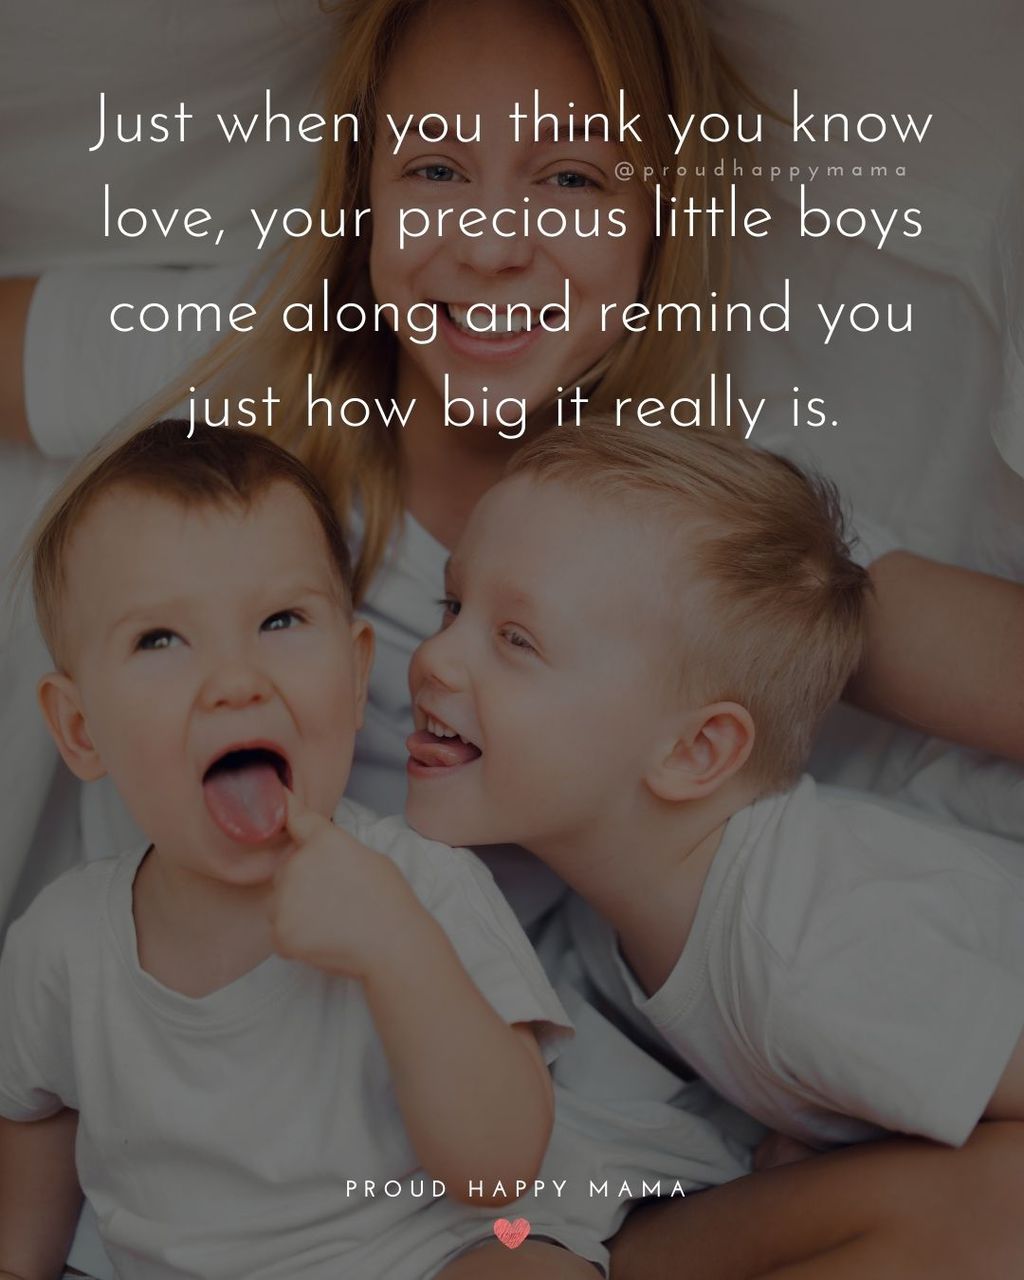 Boy Mom Quotes - Just when you think you know love, your precious little boys come along and remind you just how big it really is.